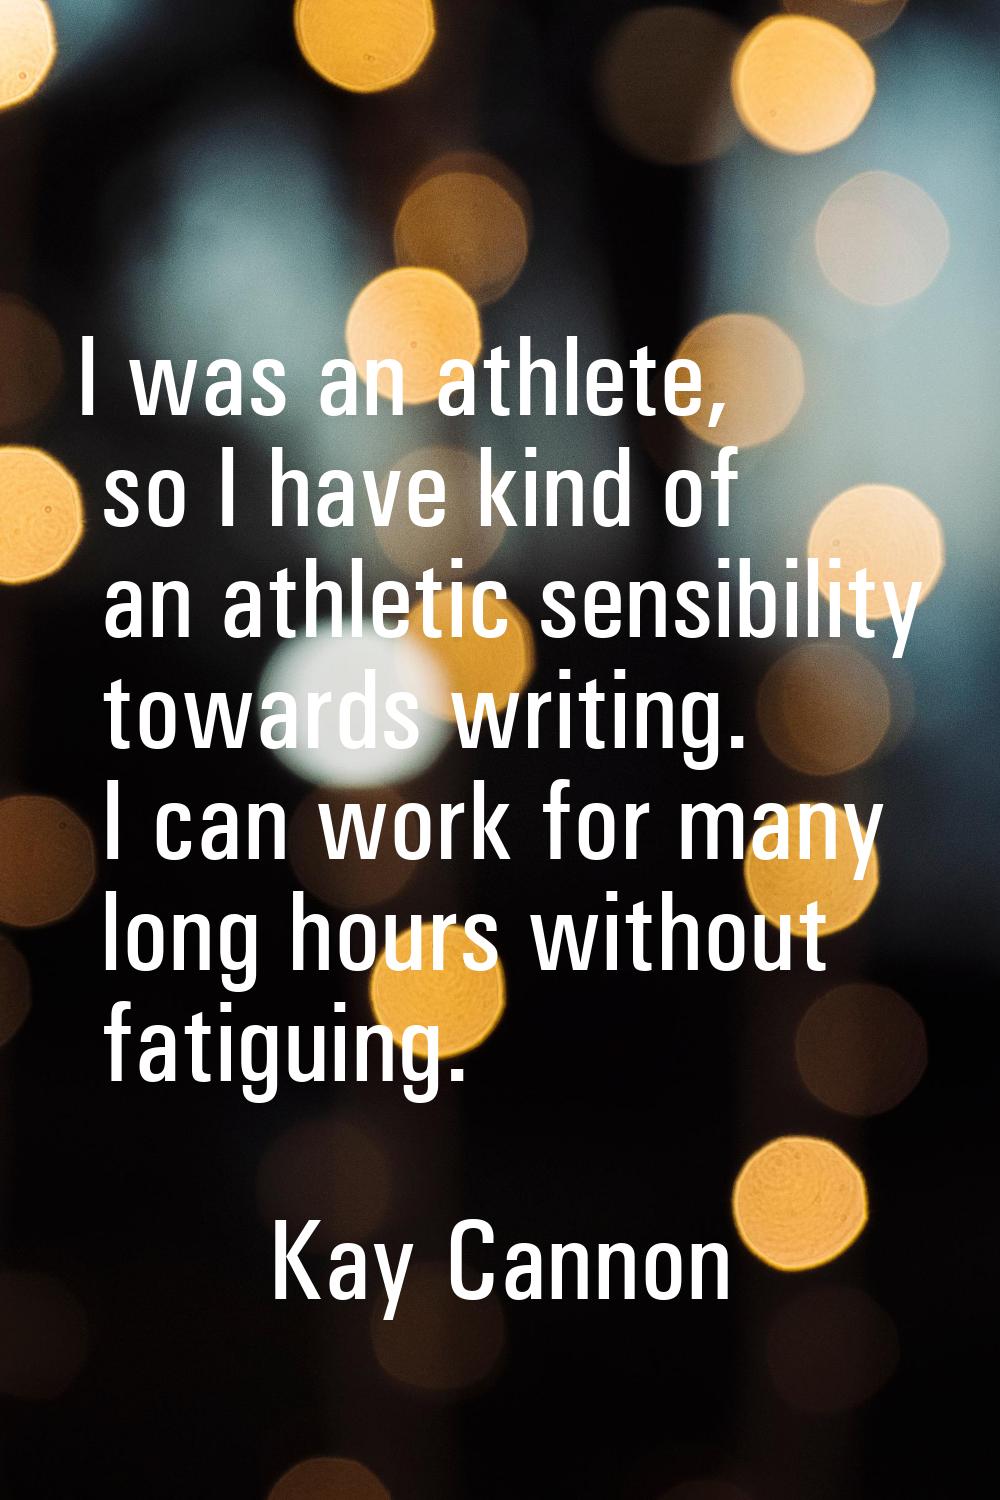 I was an athlete, so I have kind of an athletic sensibility towards writing. I can work for many lo